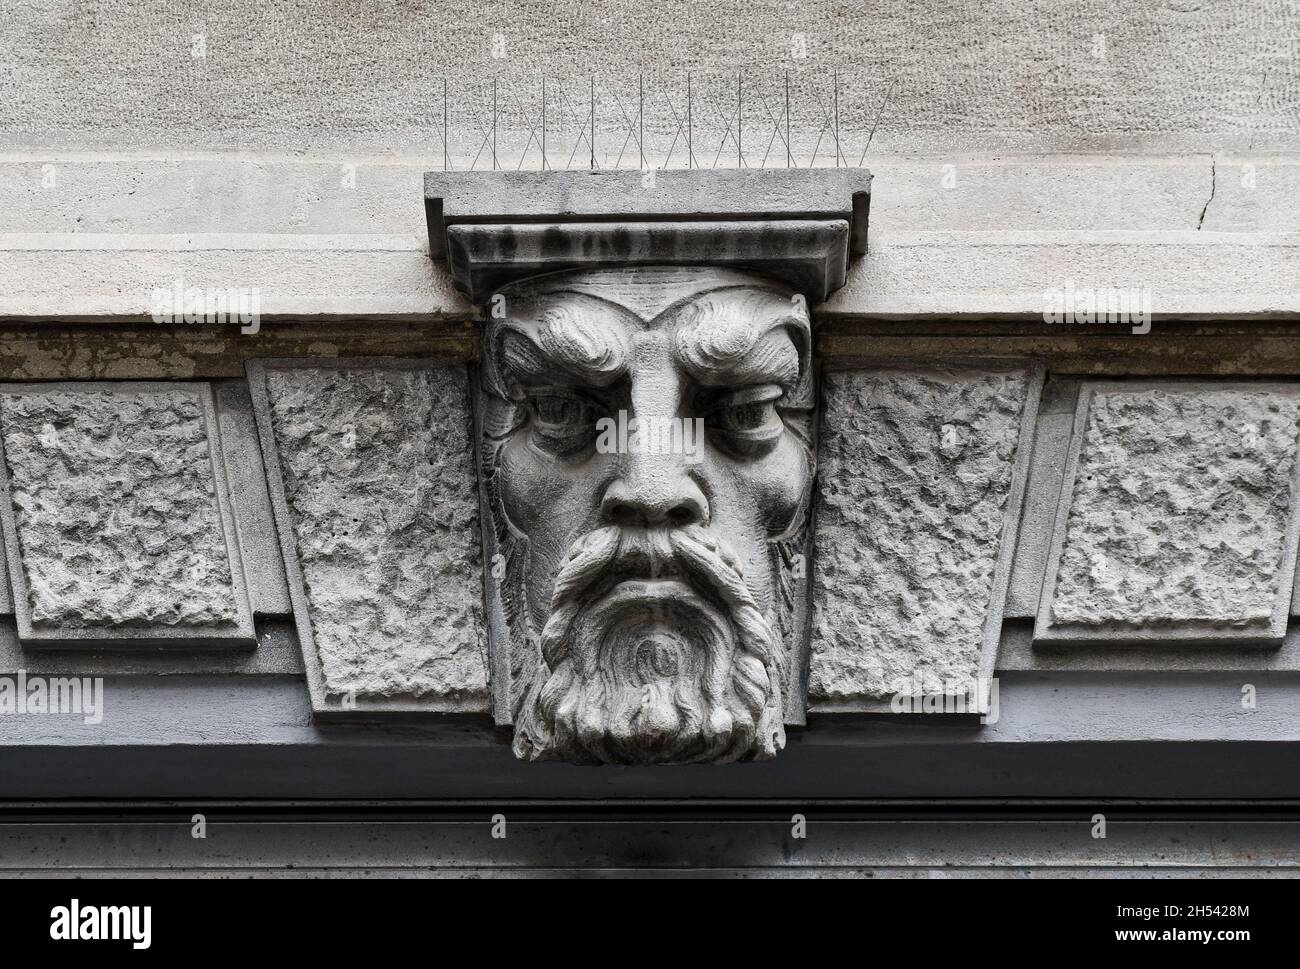 Detail of the stone bas-relief on the façade of an old building representing the face of a bearded man, Parma, Emilia-Romagna, Italy Stock Photo